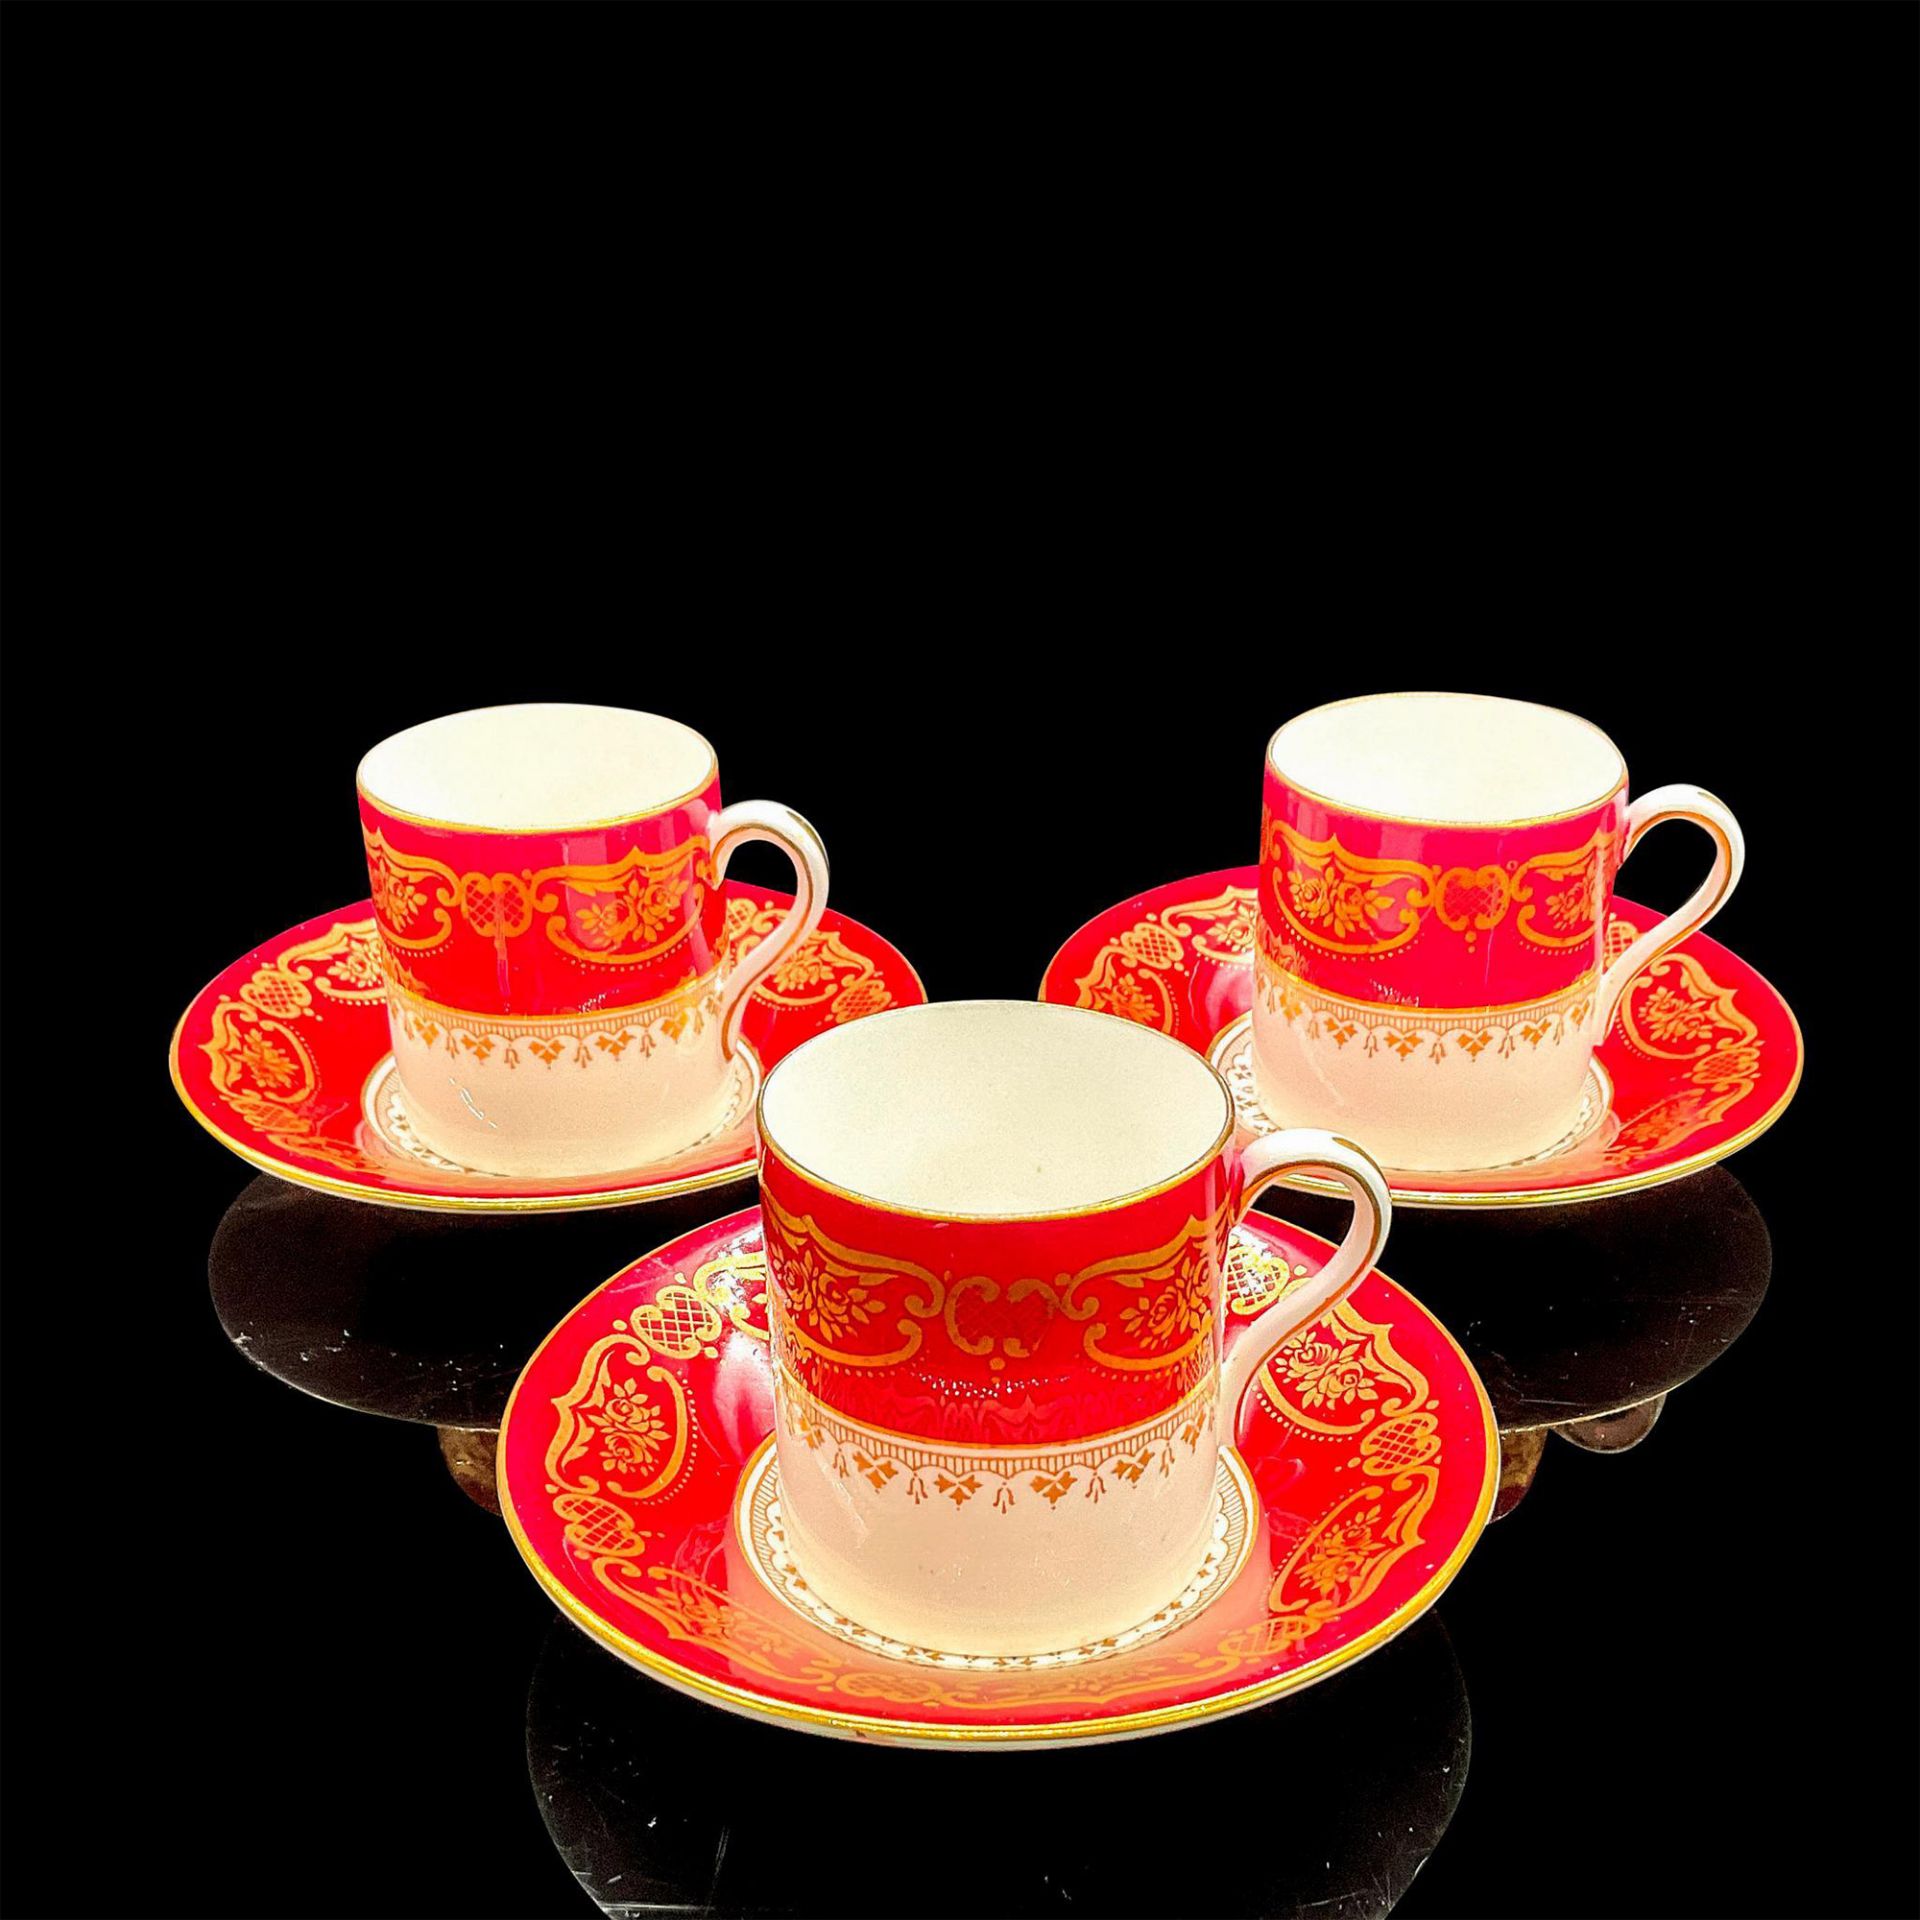 6pc Shelley England Demitasse Cups and Saucers